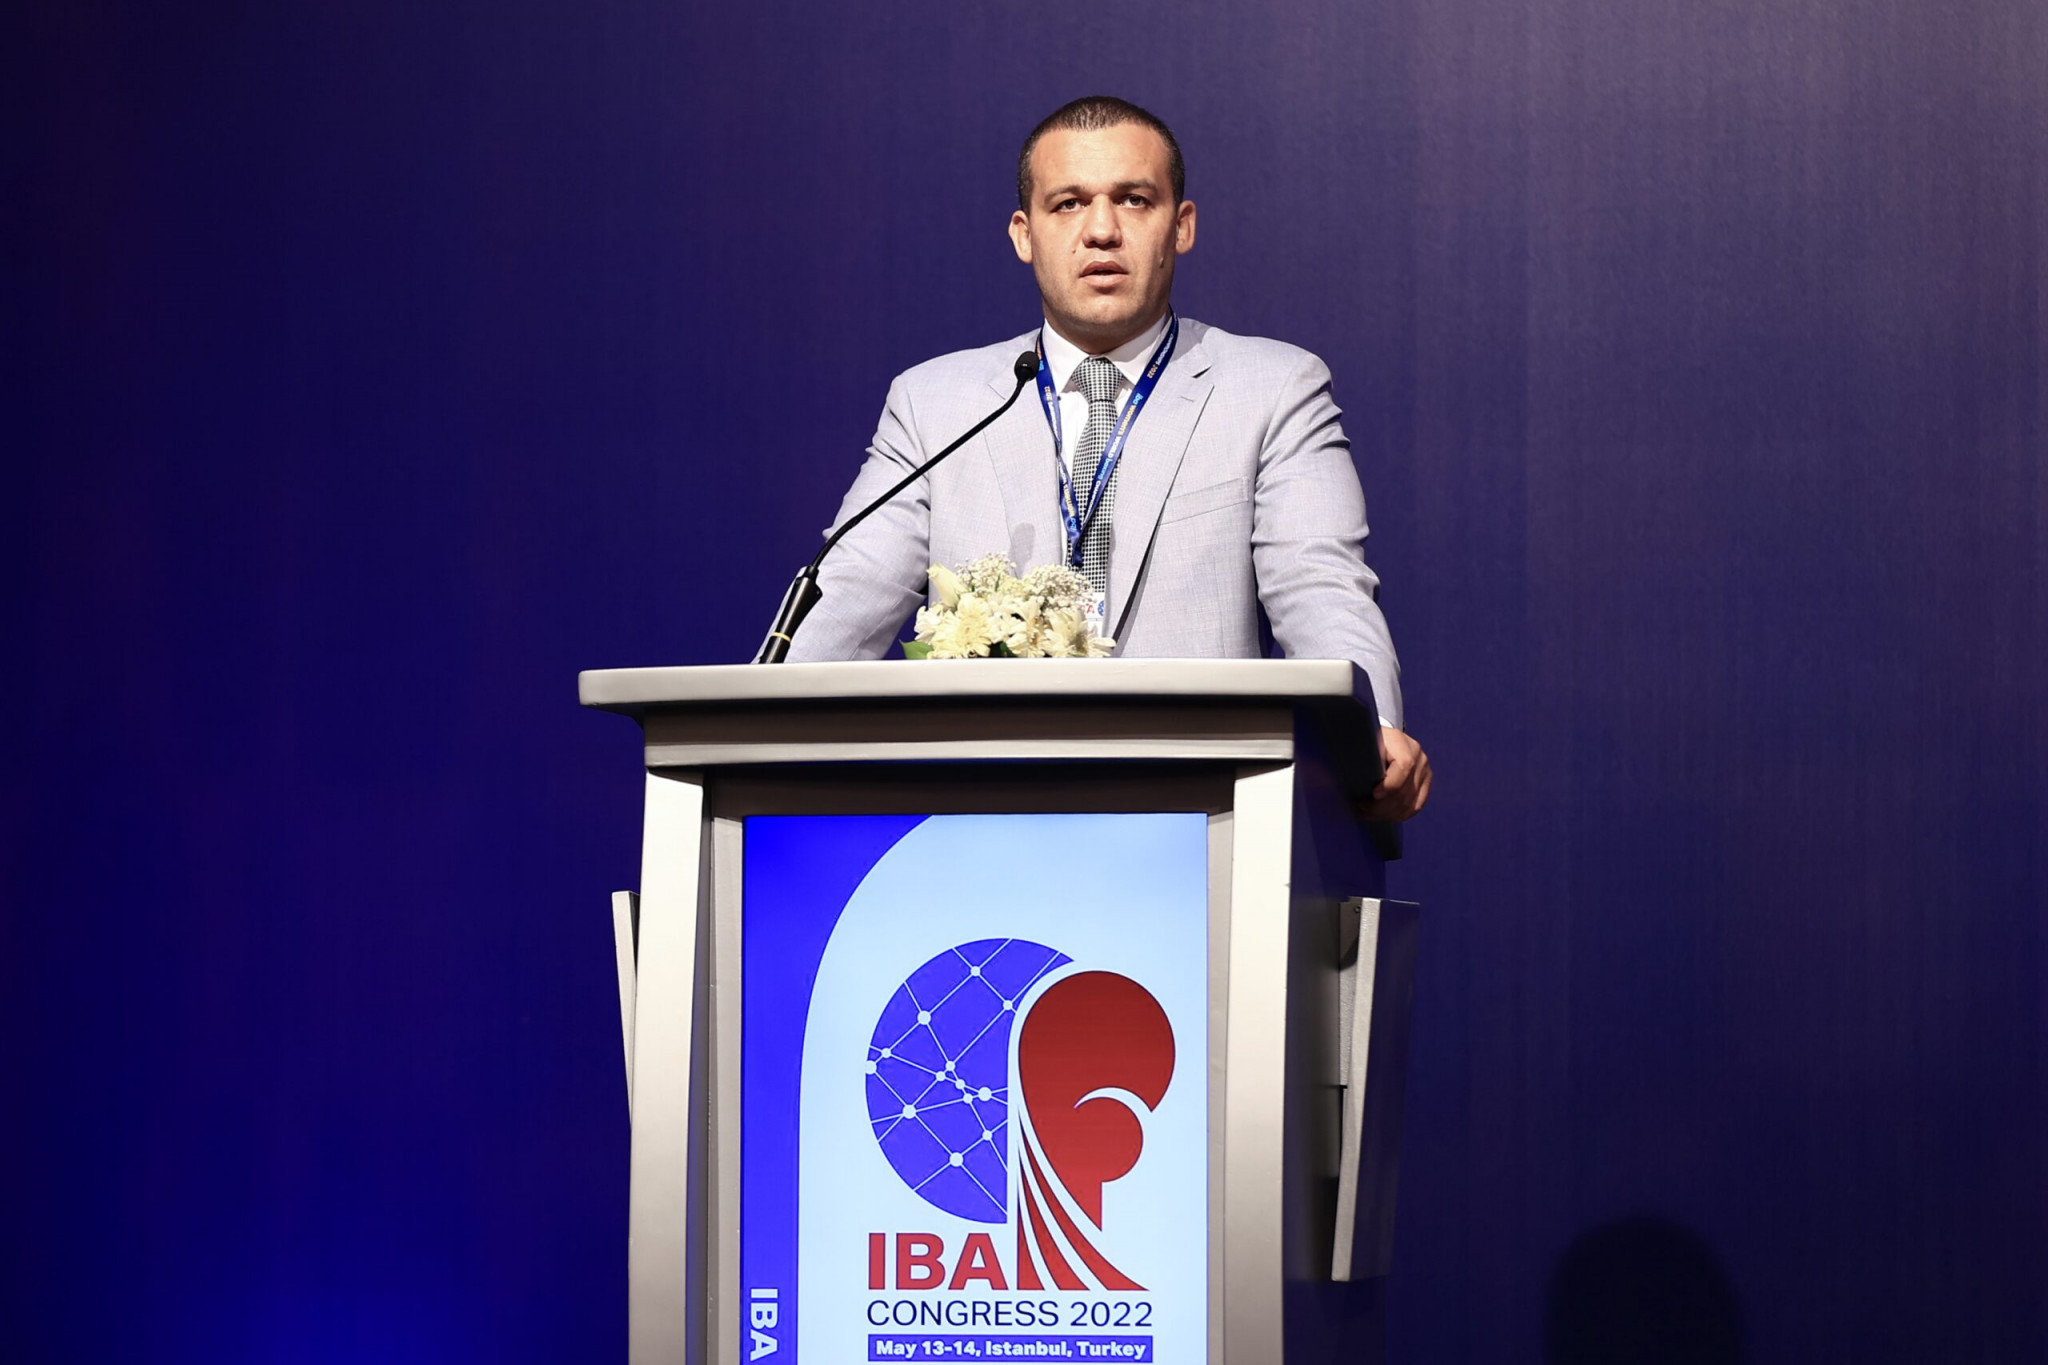 Umar Kremlev was re-elected IBA President at a controversial Congress in Istanbul in May, but the election will now be re-run at a venue to be announced ©IBA